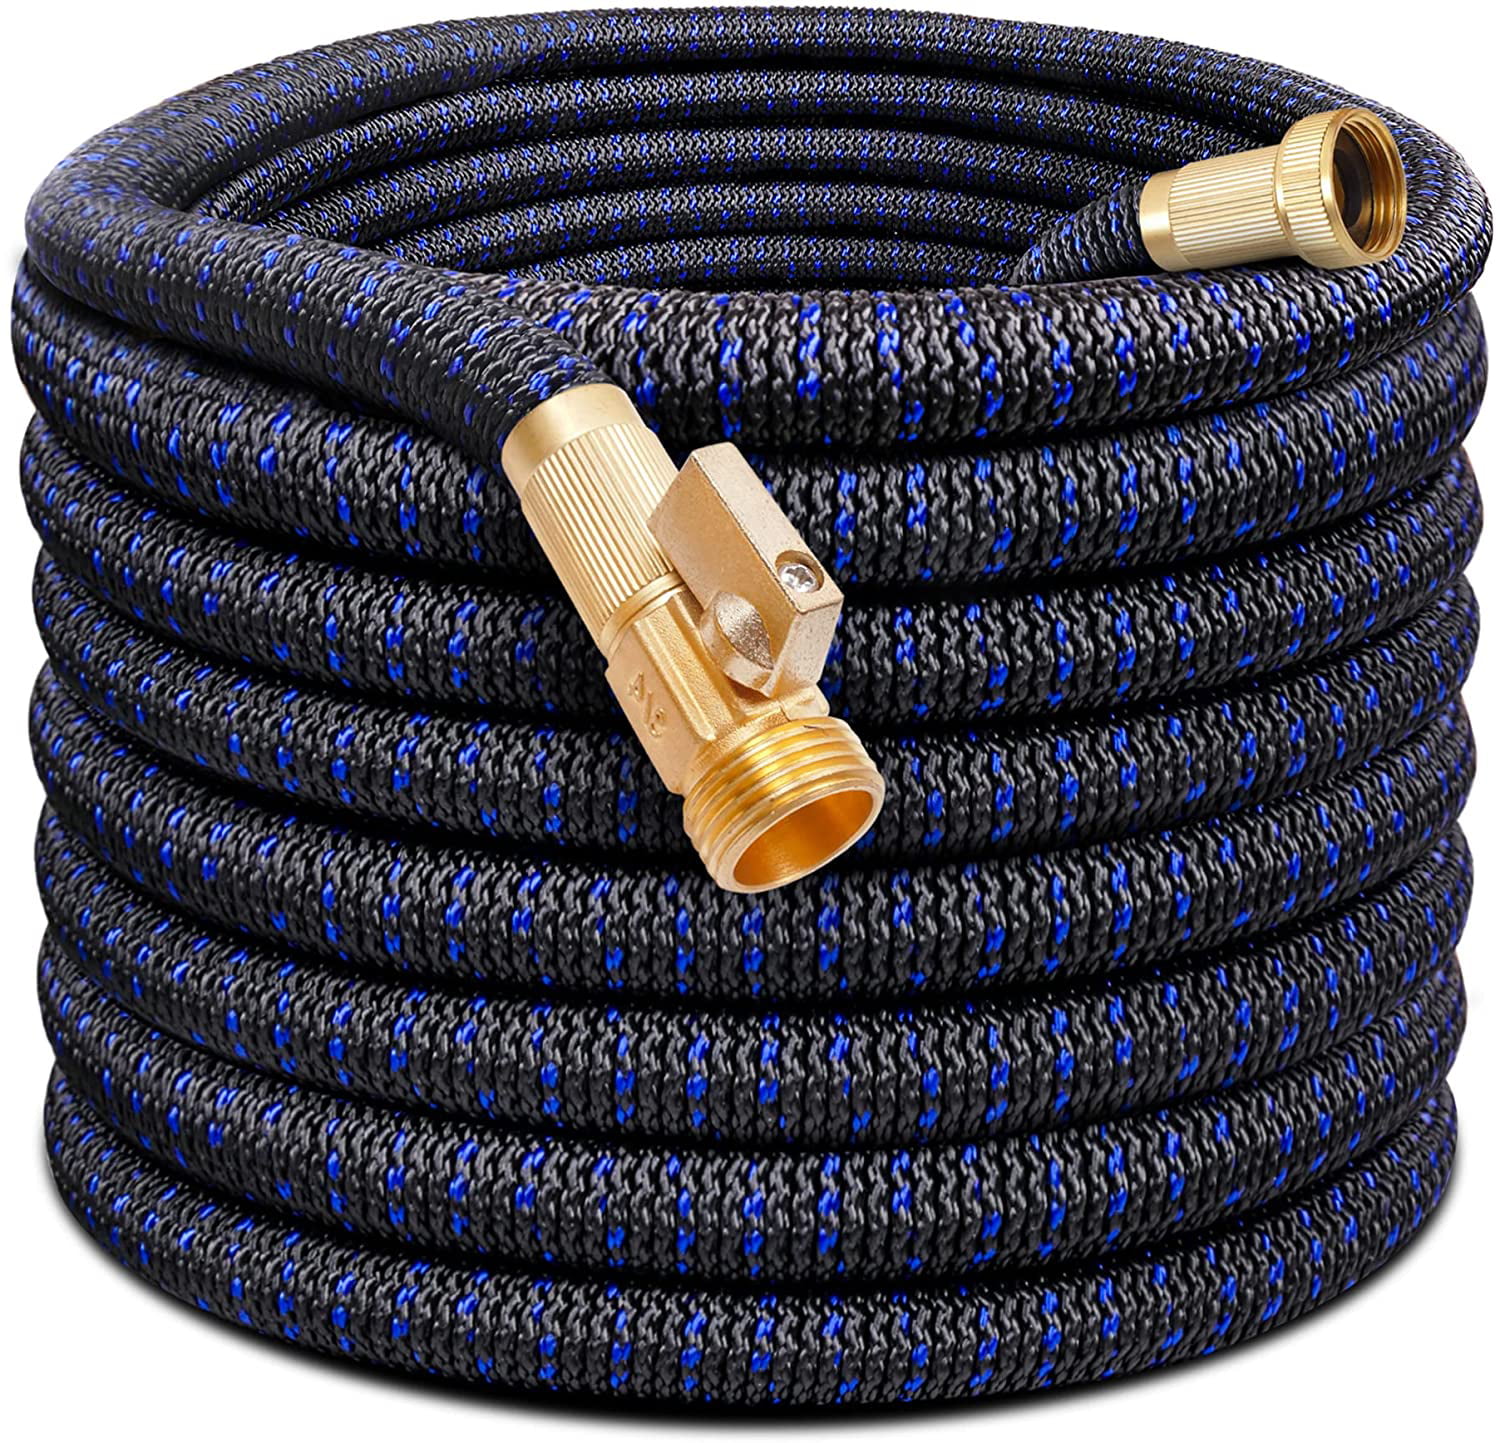 Water Hose Extra Strength Fabric Garden Hose Flexible Expanding Hose for Outdoor Lawn Car Watering Plants Double Latex Core 75ft Lightweight Expandable Garden Hose with 3/4 Solid Fittings